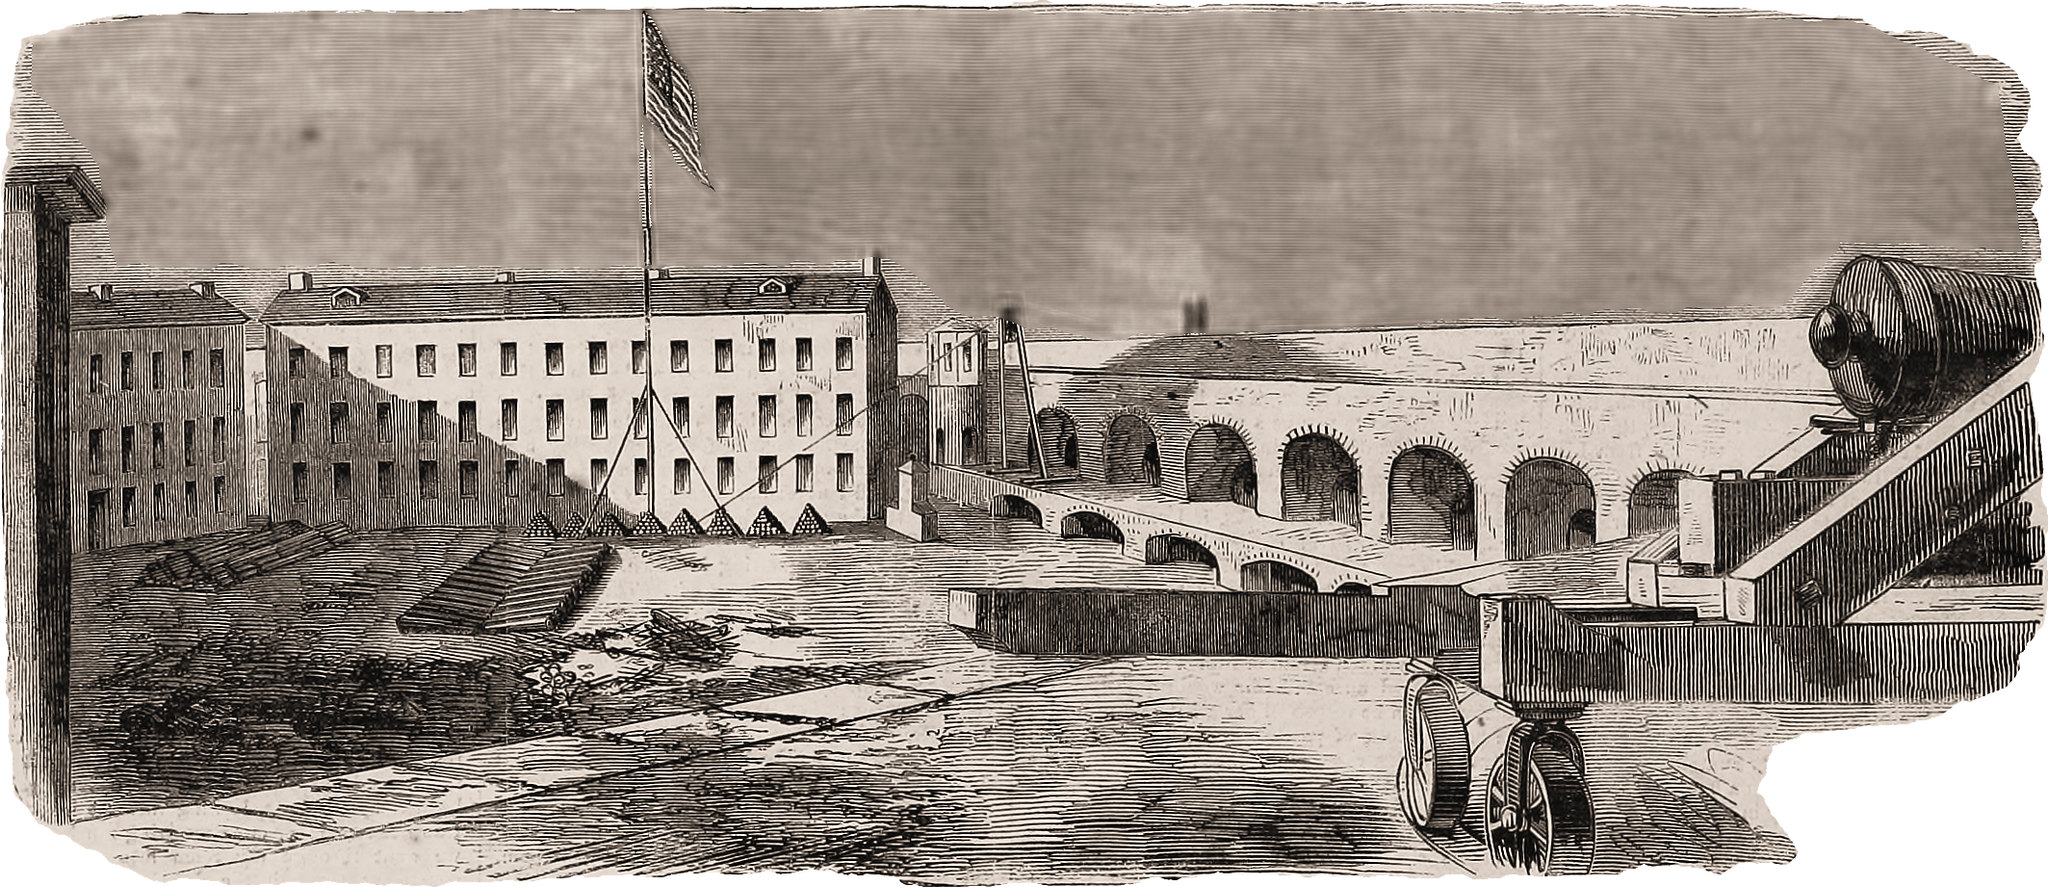 Interior of Fort Sumter, from the Parapet—Drawn by an Officer of Major Anderson's Command; Harper's Weekly, January 26, 1861